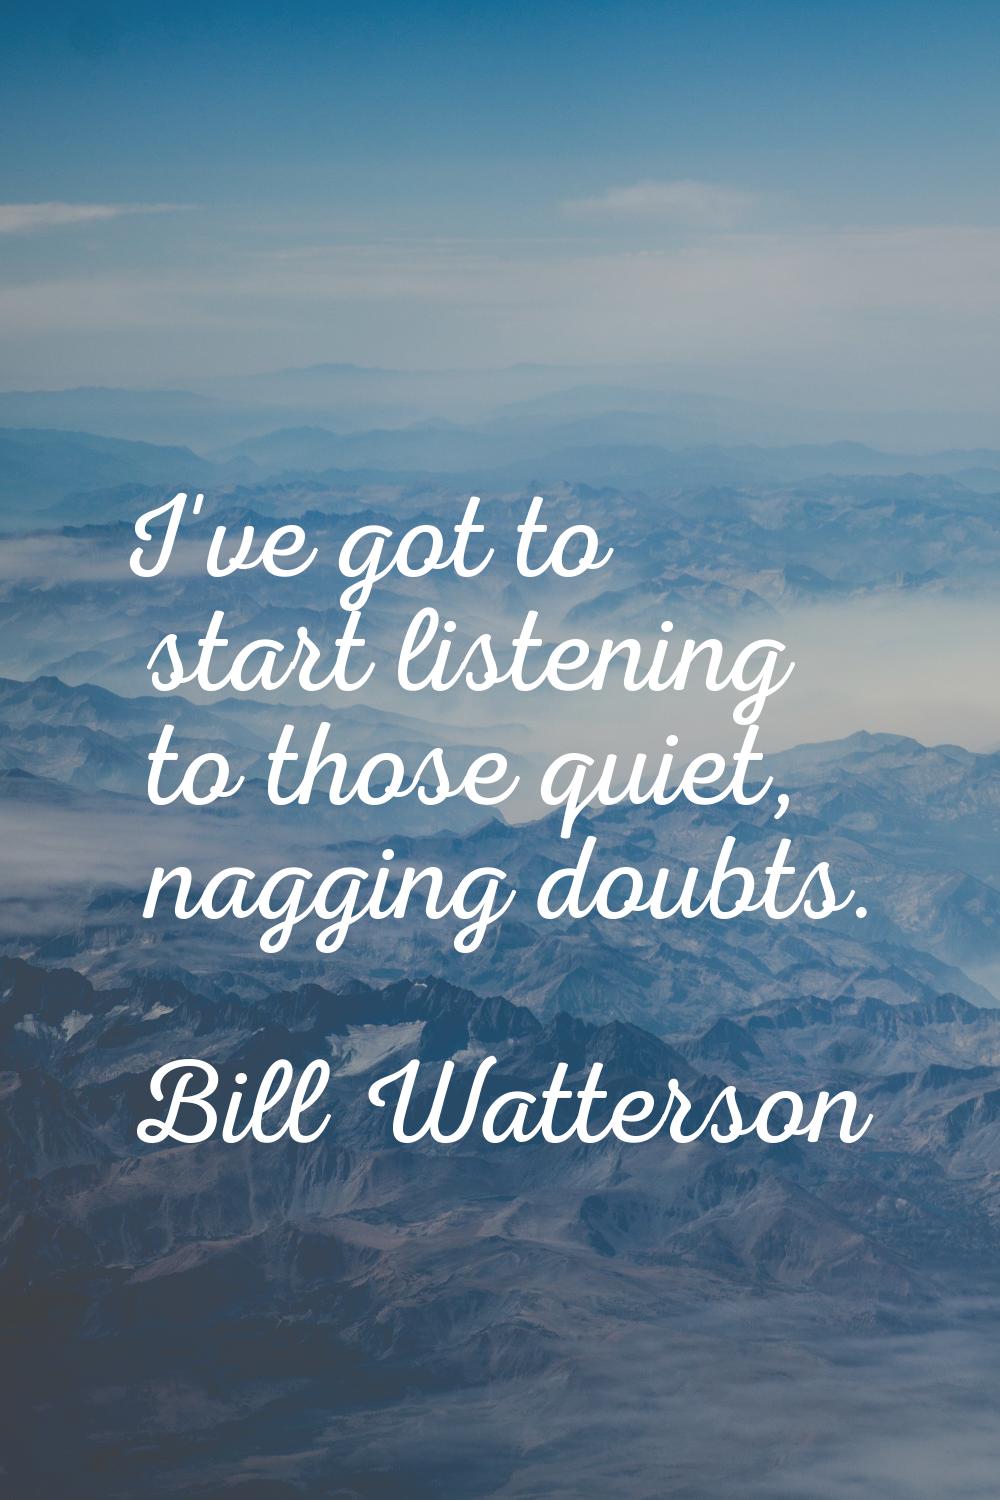 I've got to start listening to those quiet, nagging doubts.